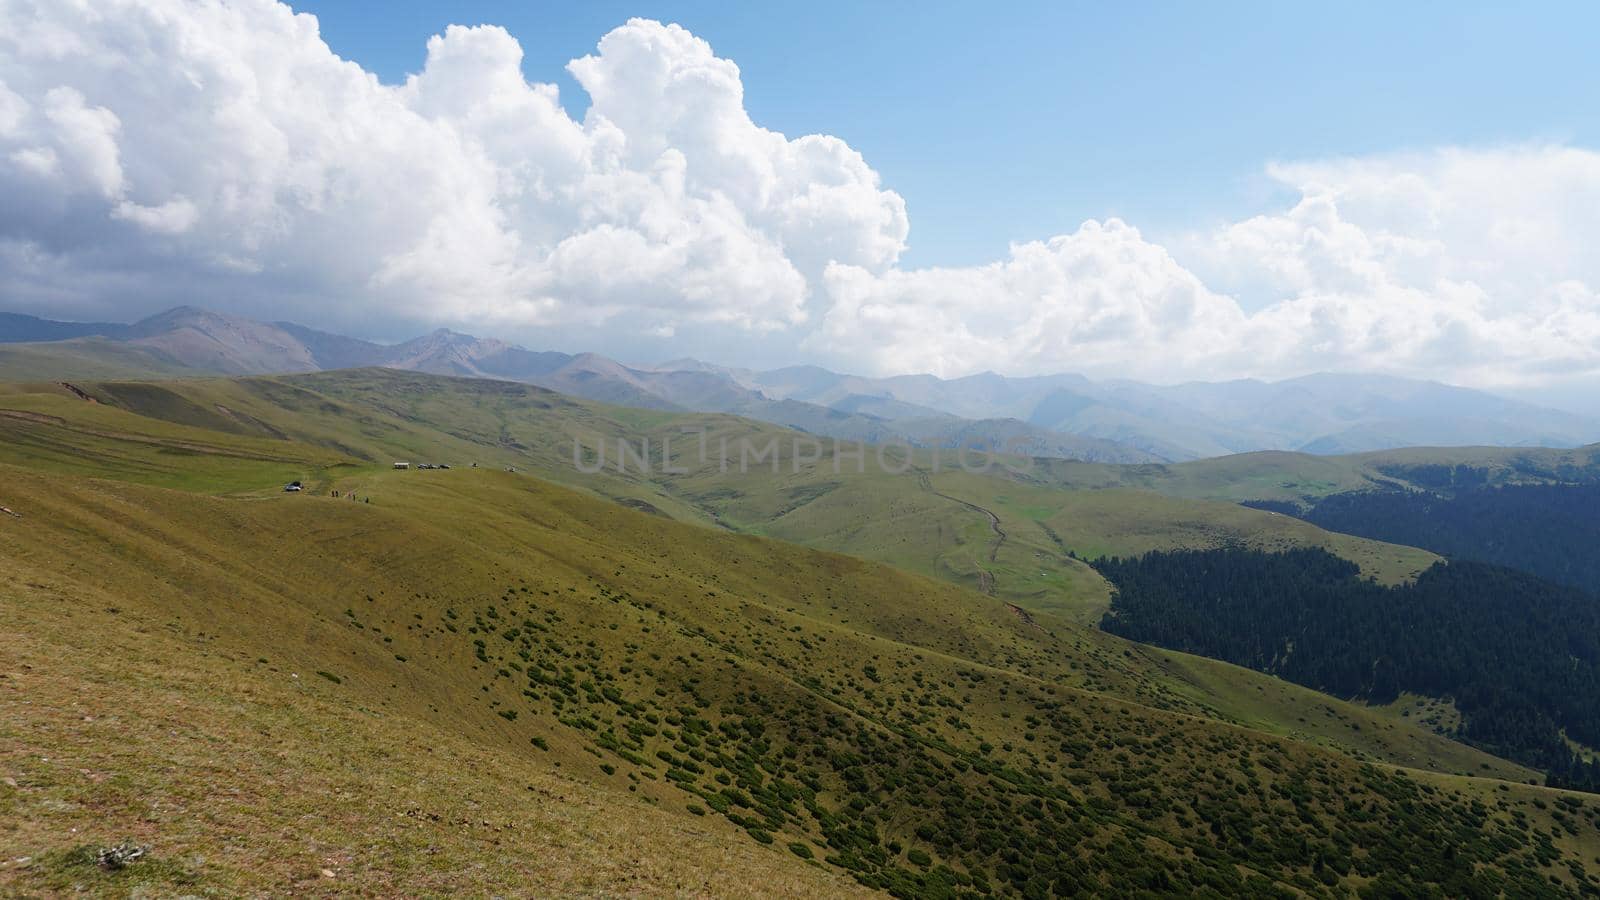 Big white clouds over green hills and mountains. Yellow-green grass covers the mountains, tall green coniferous trees in the gorge. Low bushes grow. A light haze floats on the ground. Assy, Kazakhstan